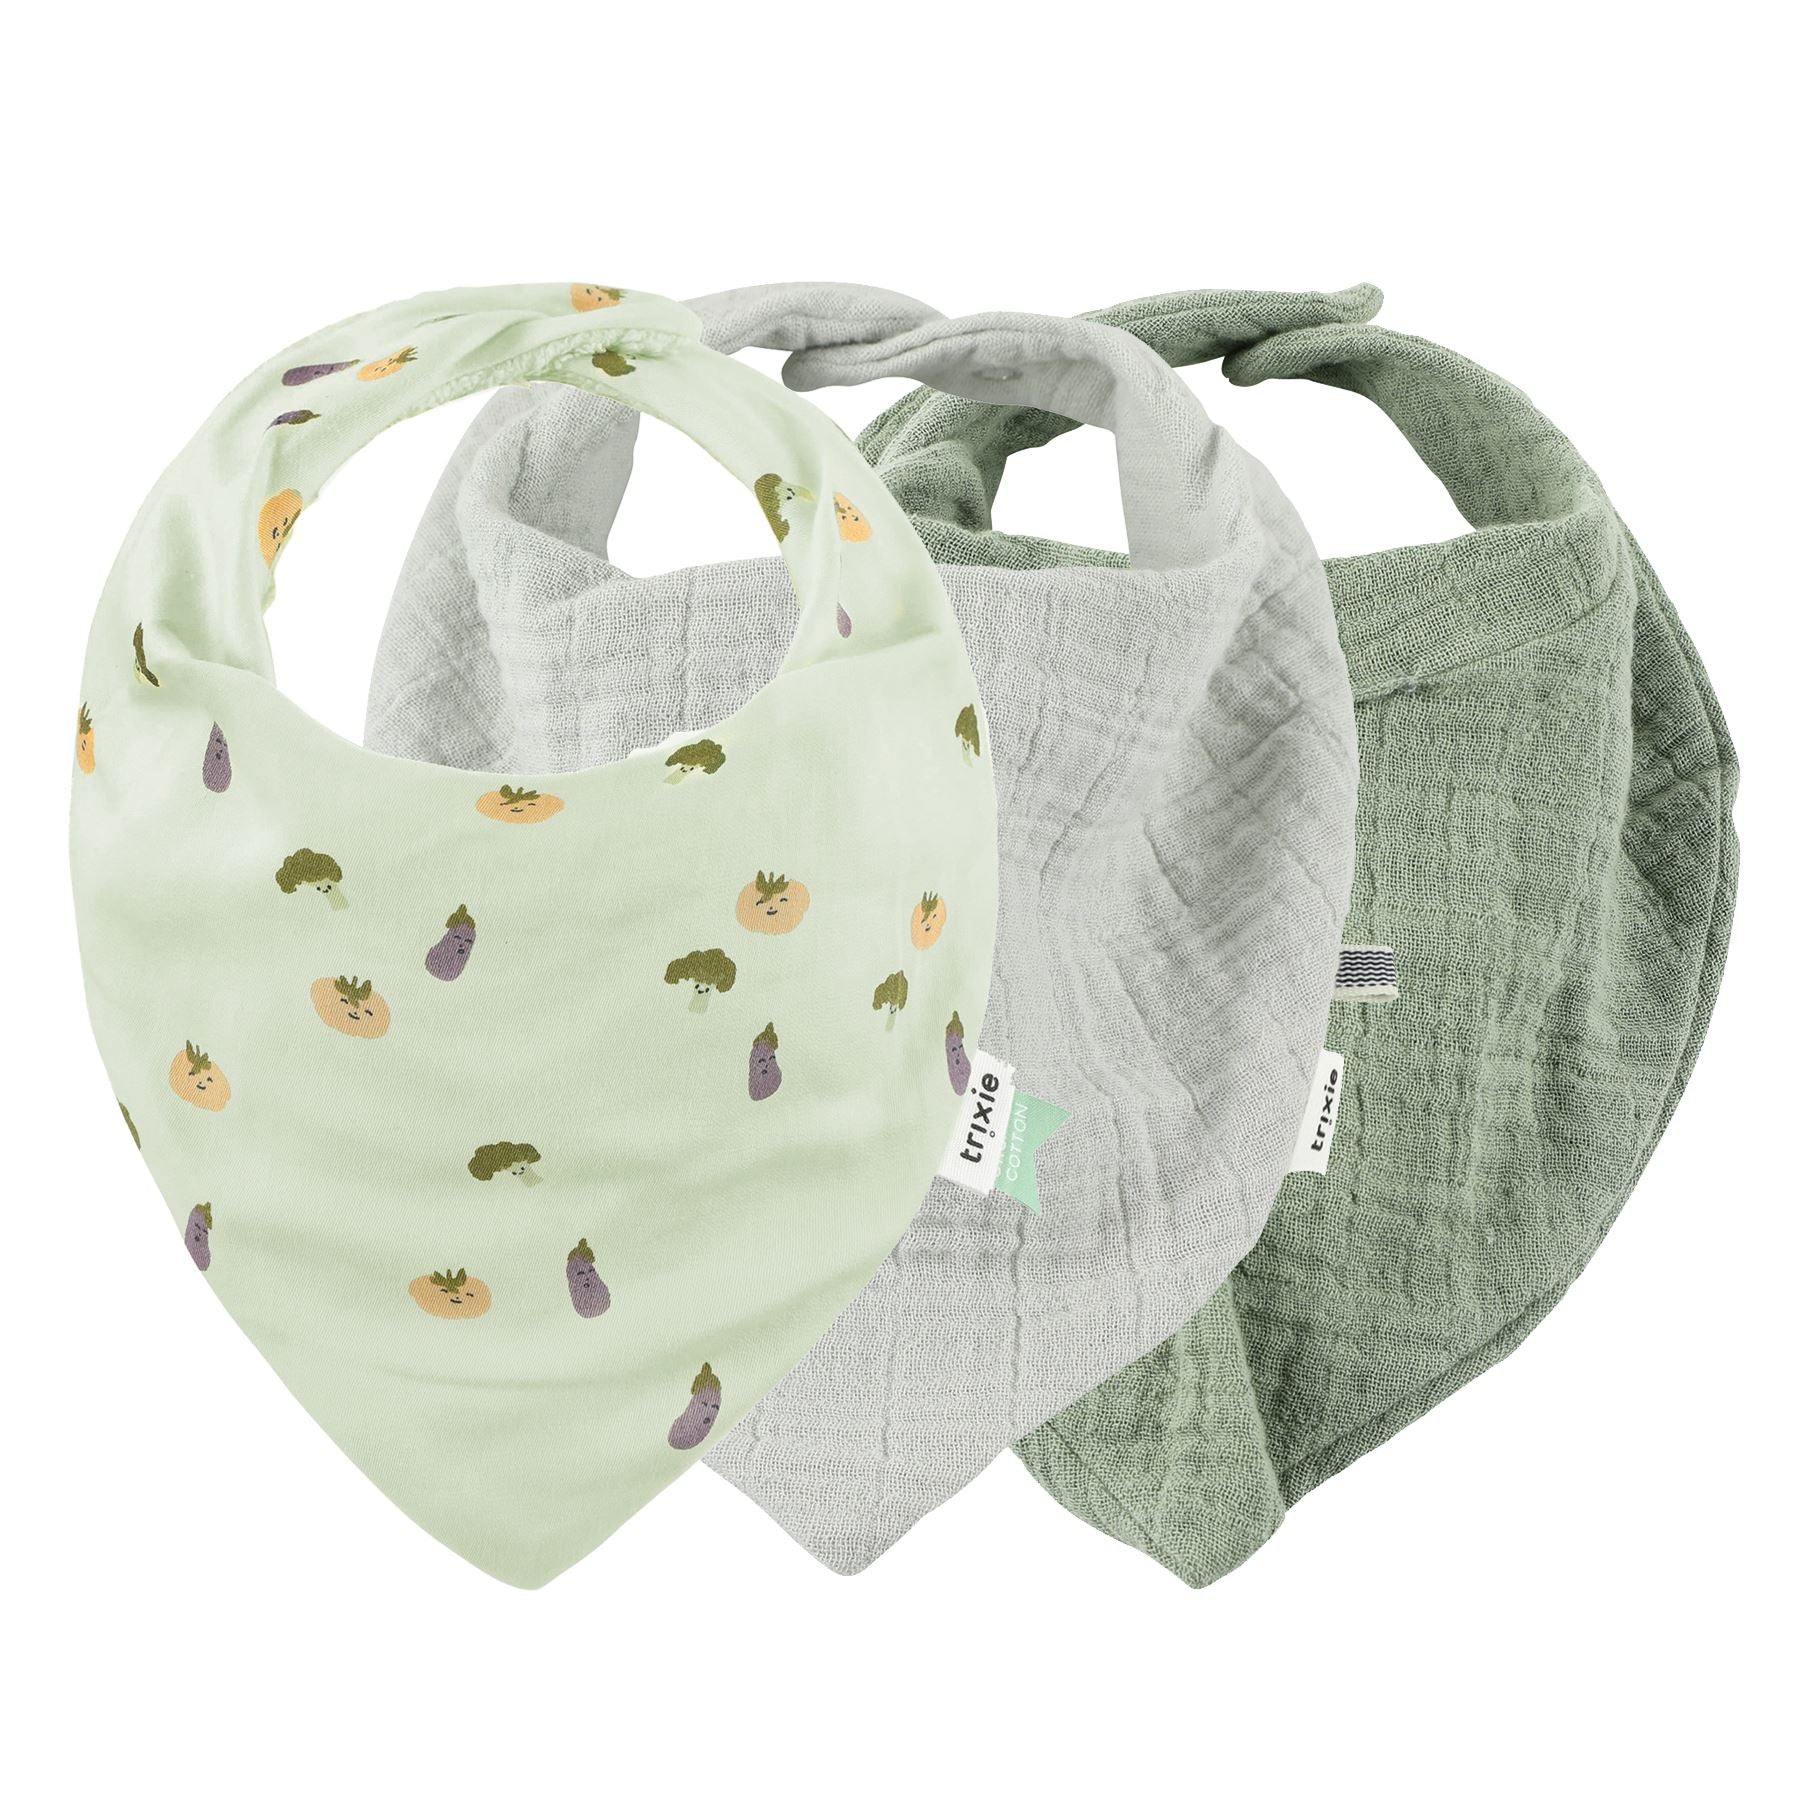 Set of 3 organic muslin bandana bibs.  One is pale green, one is green and the other has prints of friendly vegetables on a green background